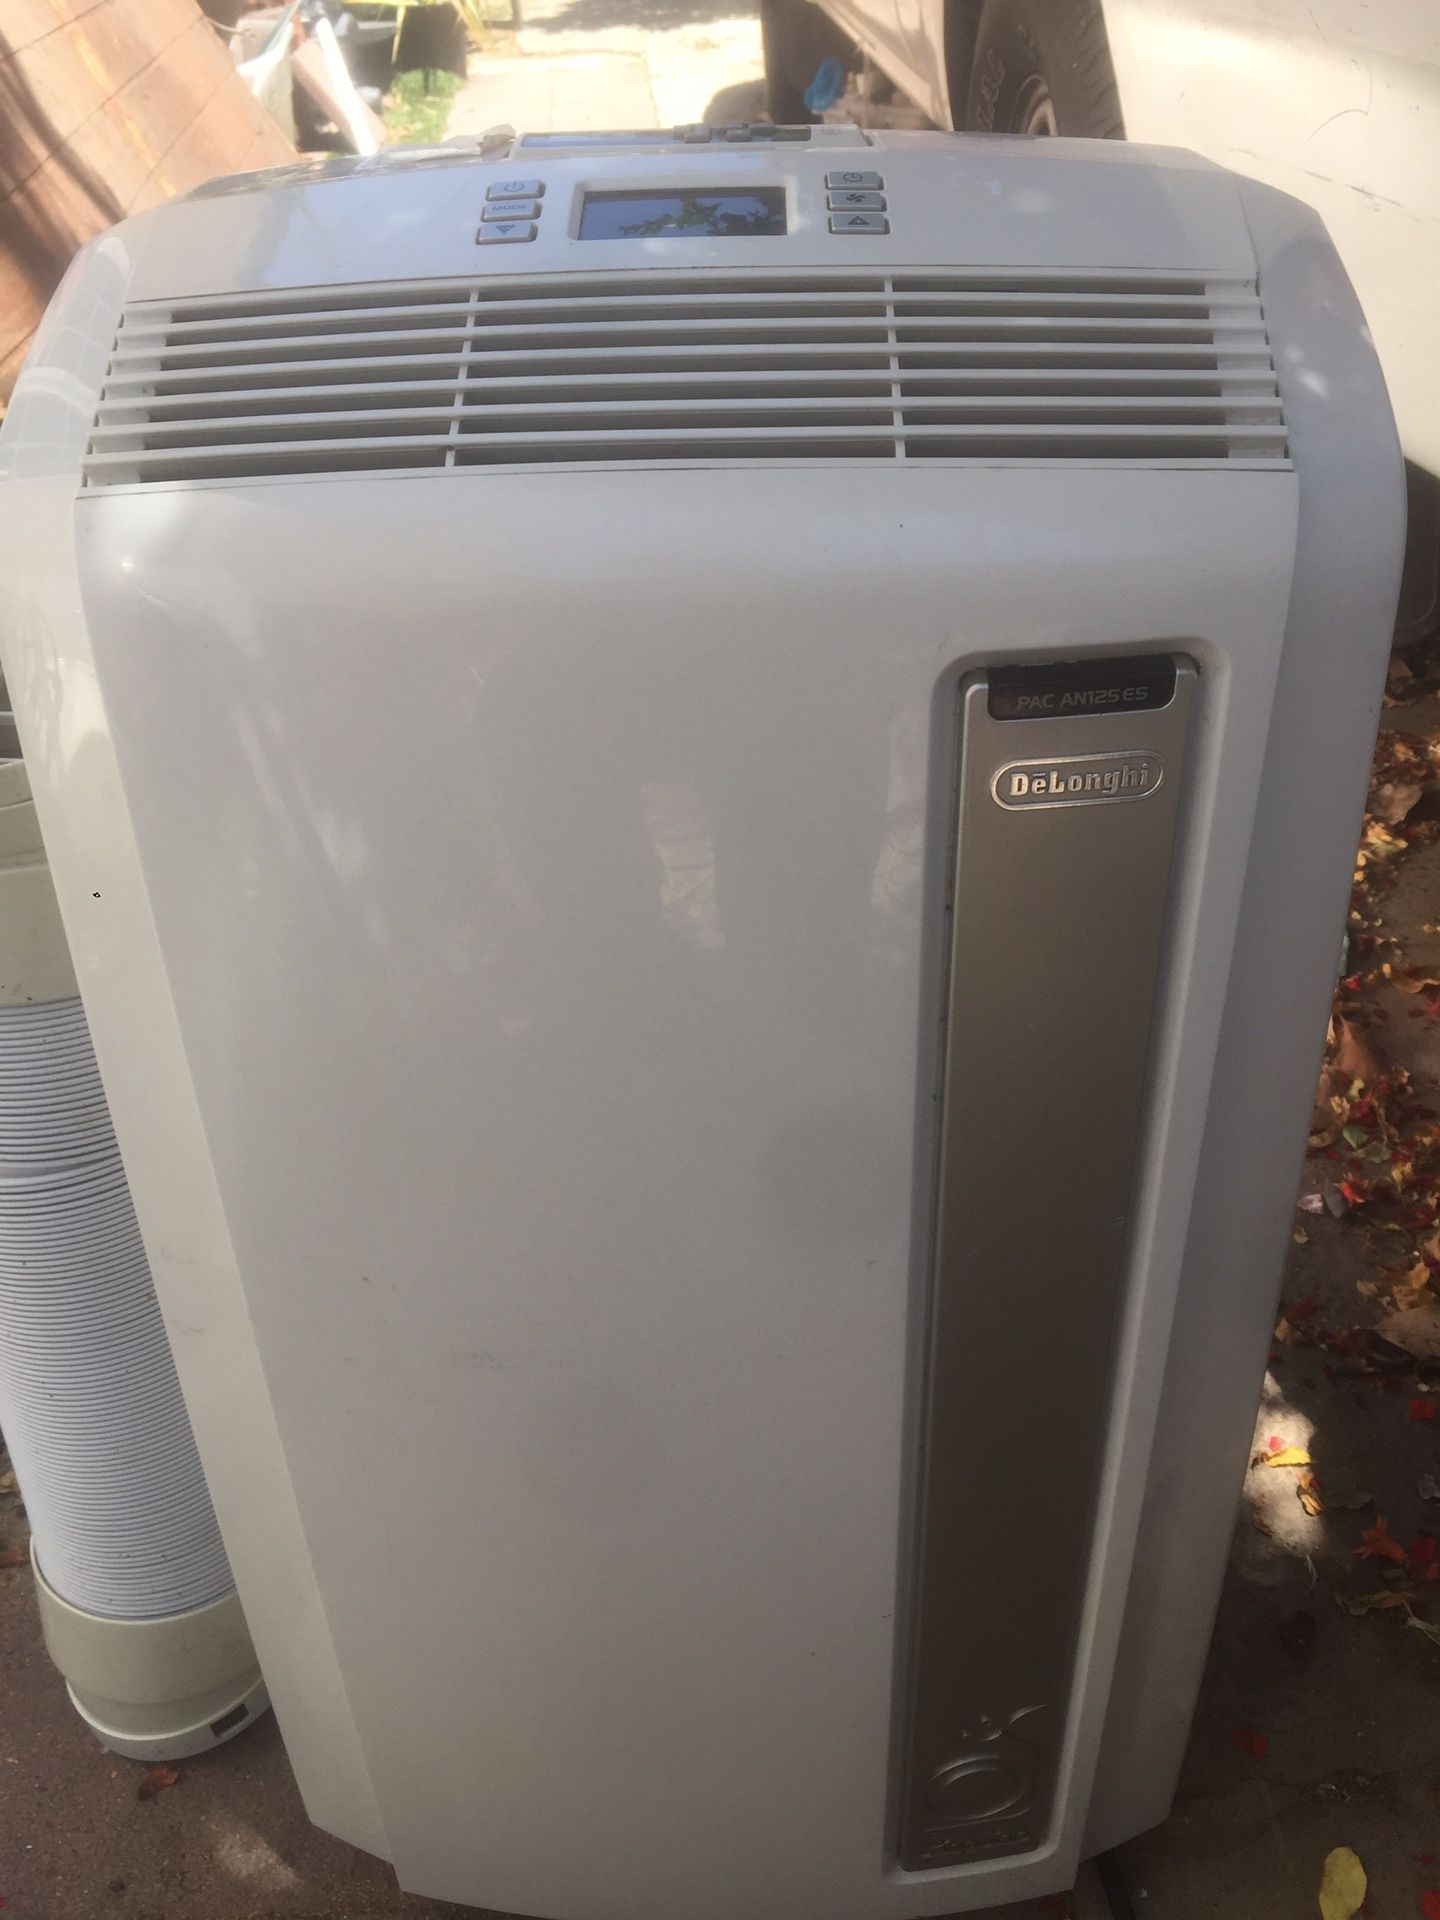 Delonghi portable air conditioner 12,500 btu. In good working conditions.